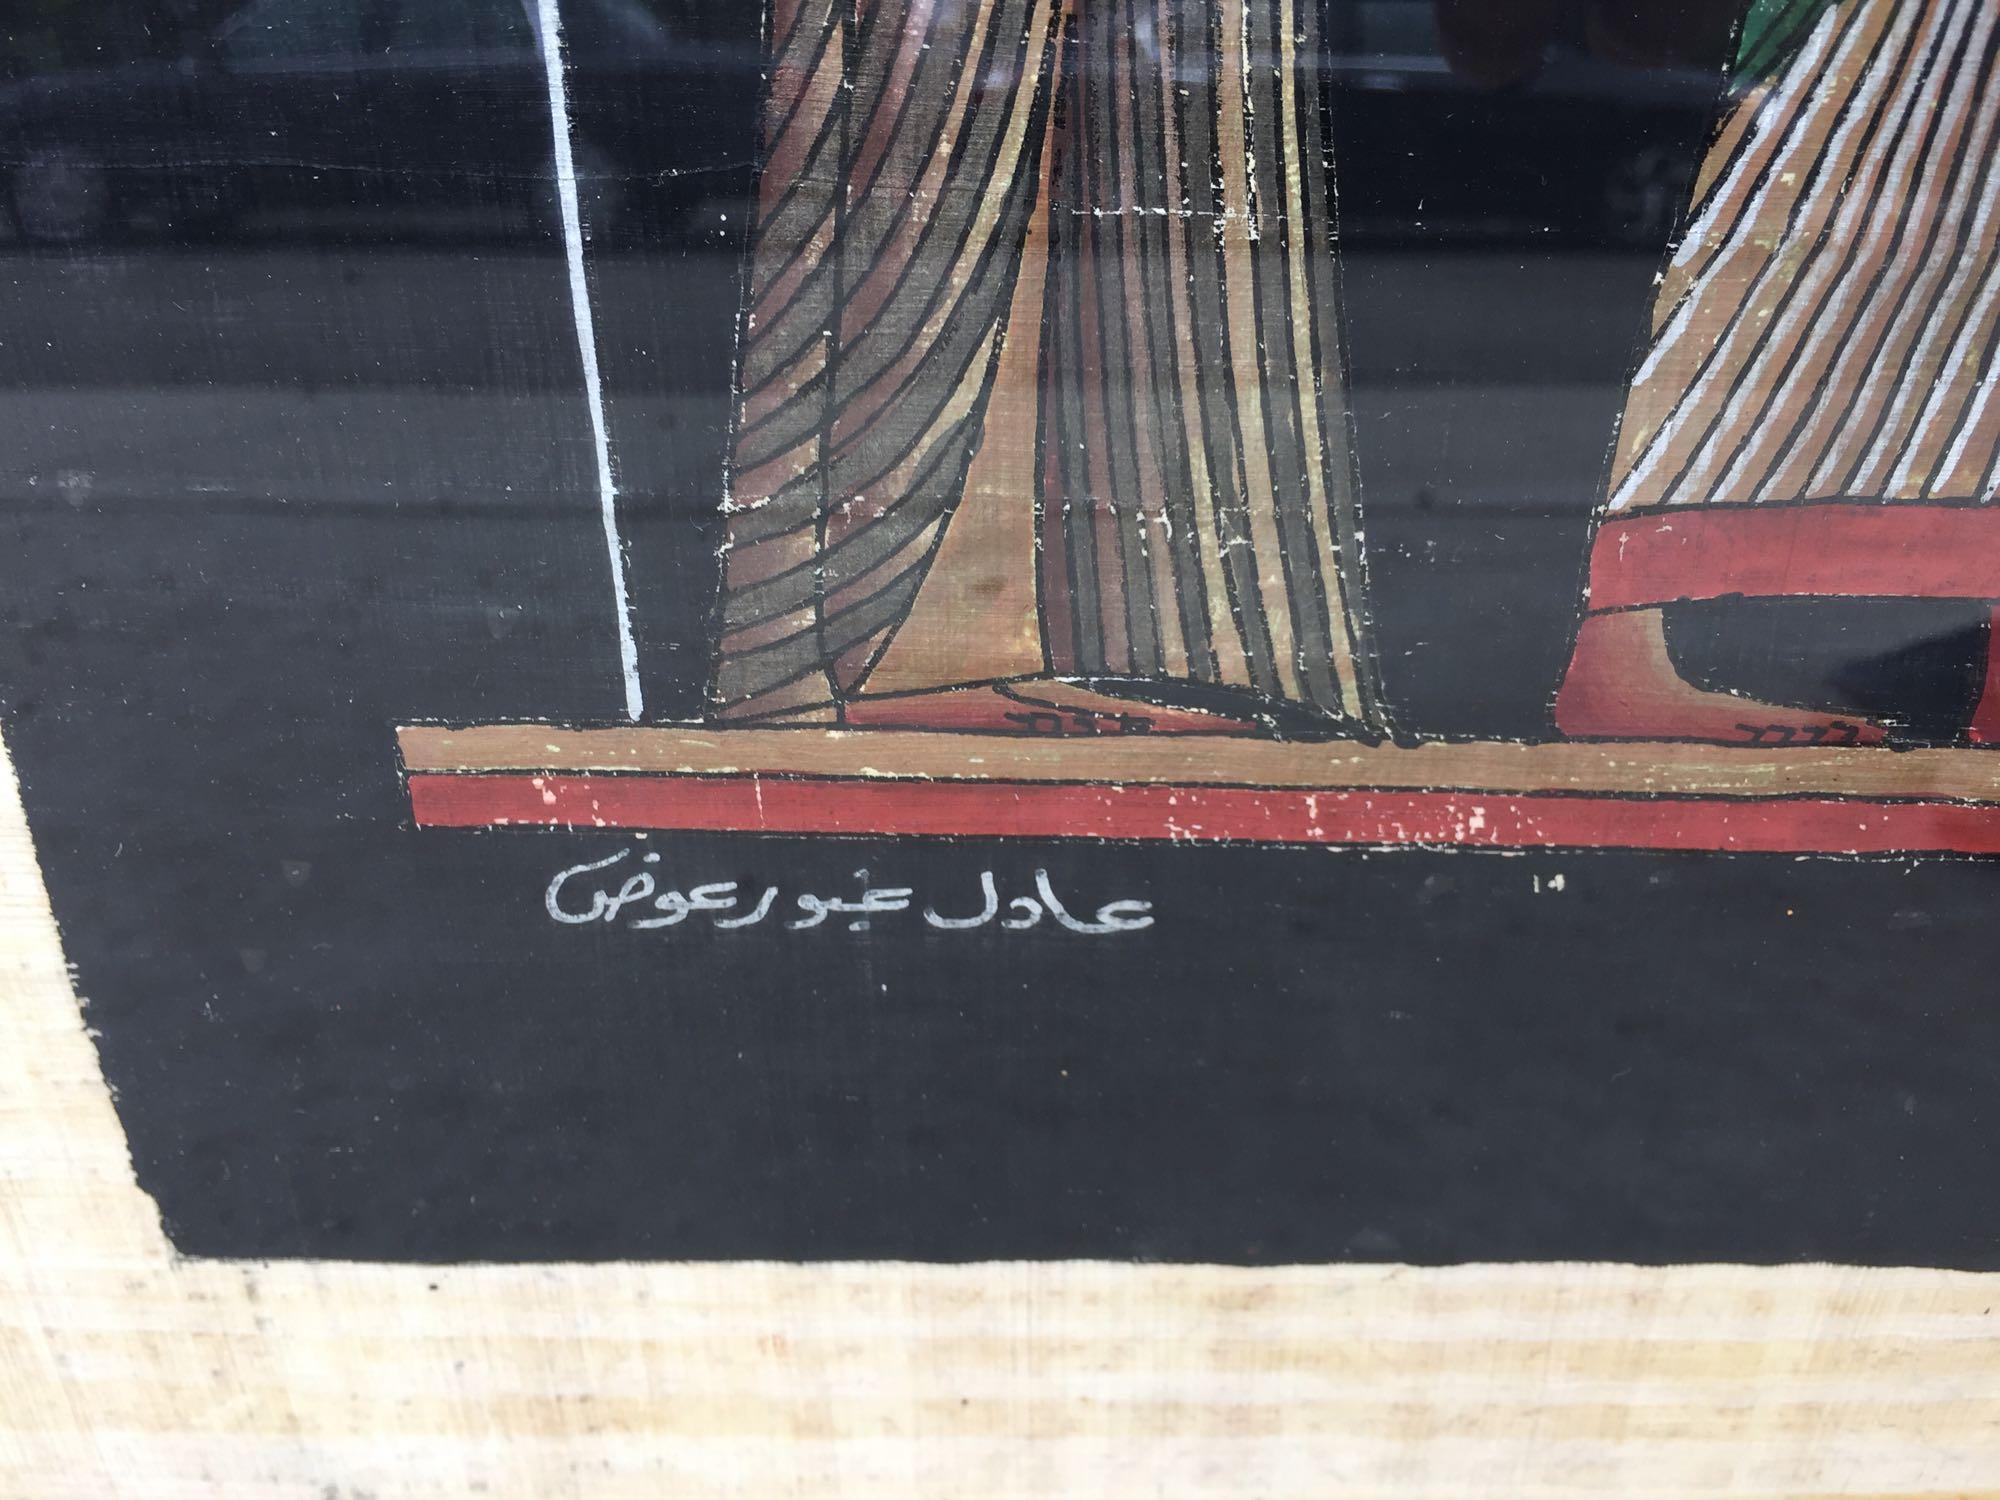 Framed Papyrus Artwork 2.5ft Tall 6.5 Wide - Egyptian Book of The Dead by Adel Ghabour Awad